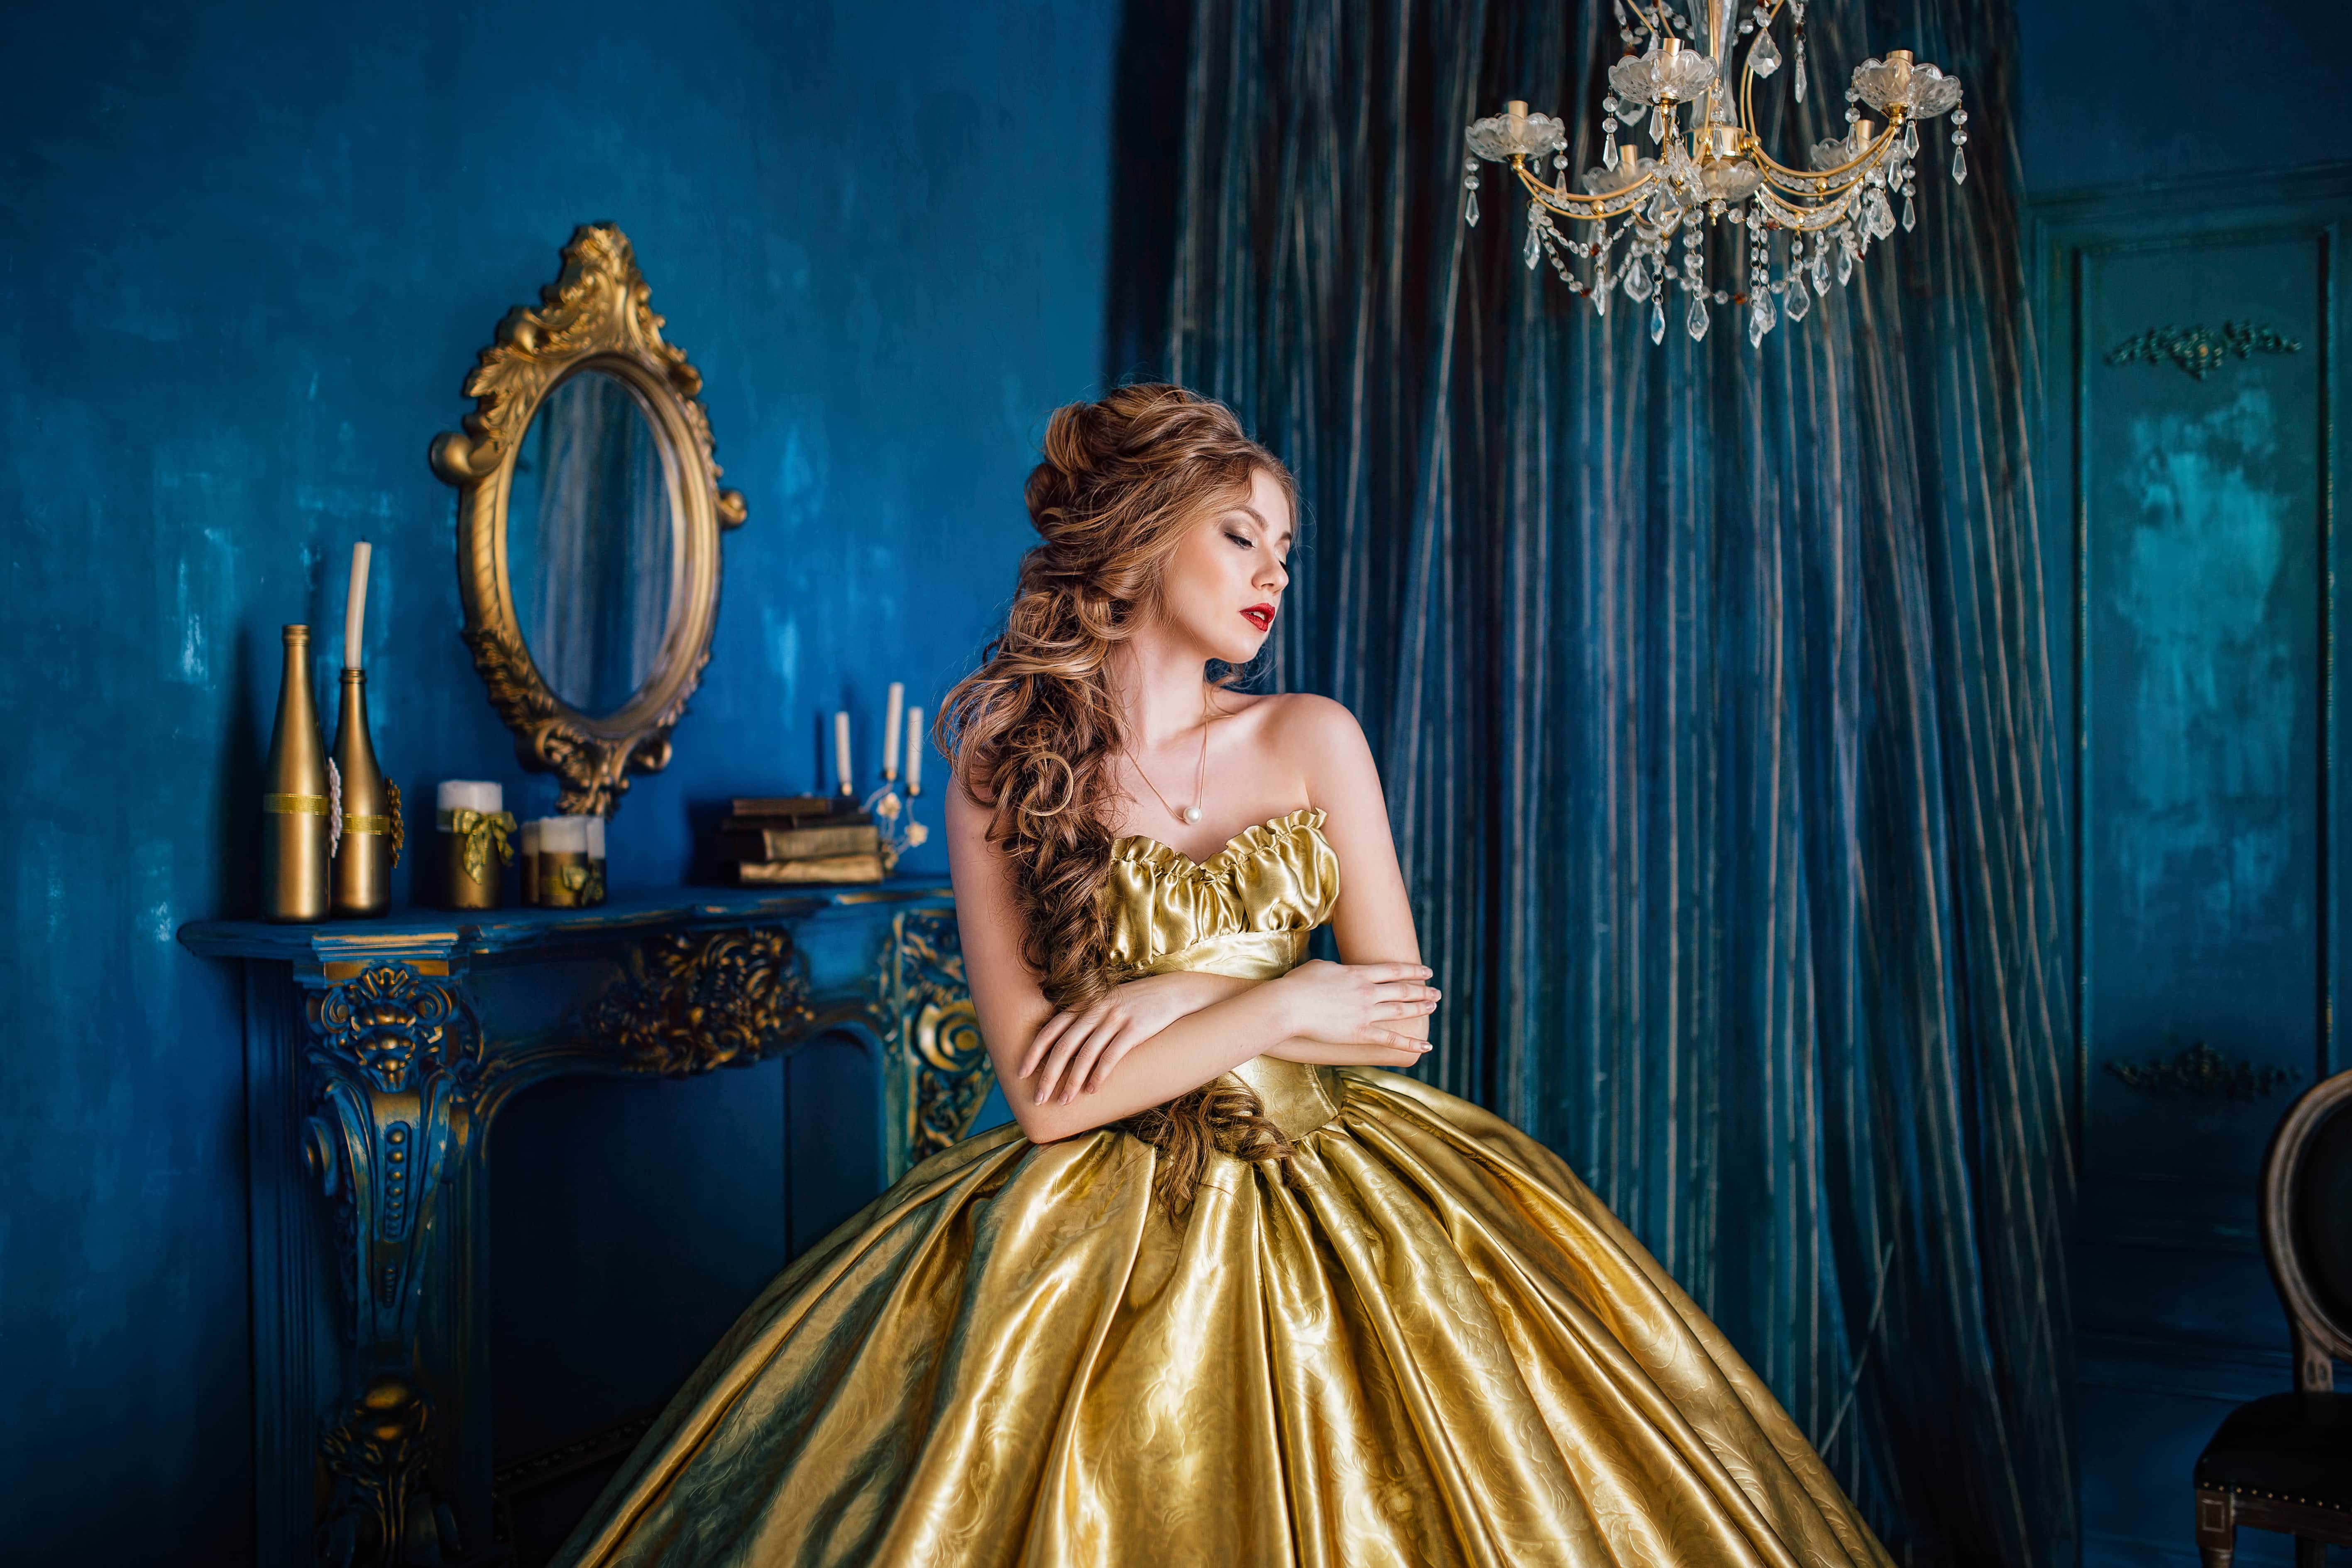 Beautiful woman in a ball gown